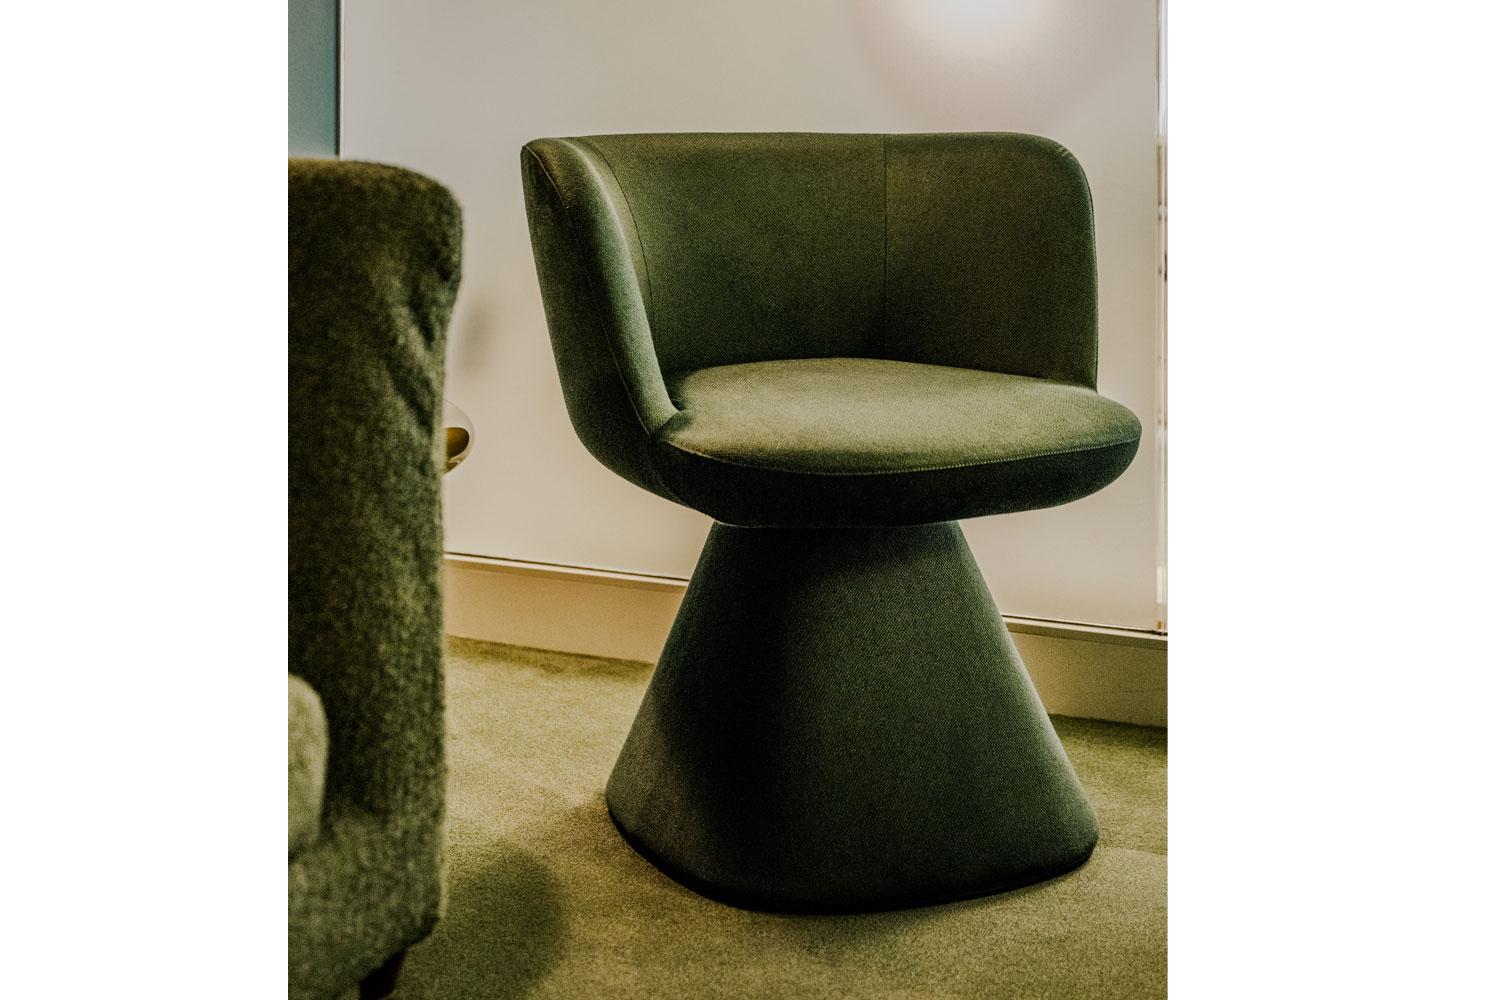 Modern B&B Italia Flair O' Swivel Dining Chair in Forest Green Satin - Available Now For Sale